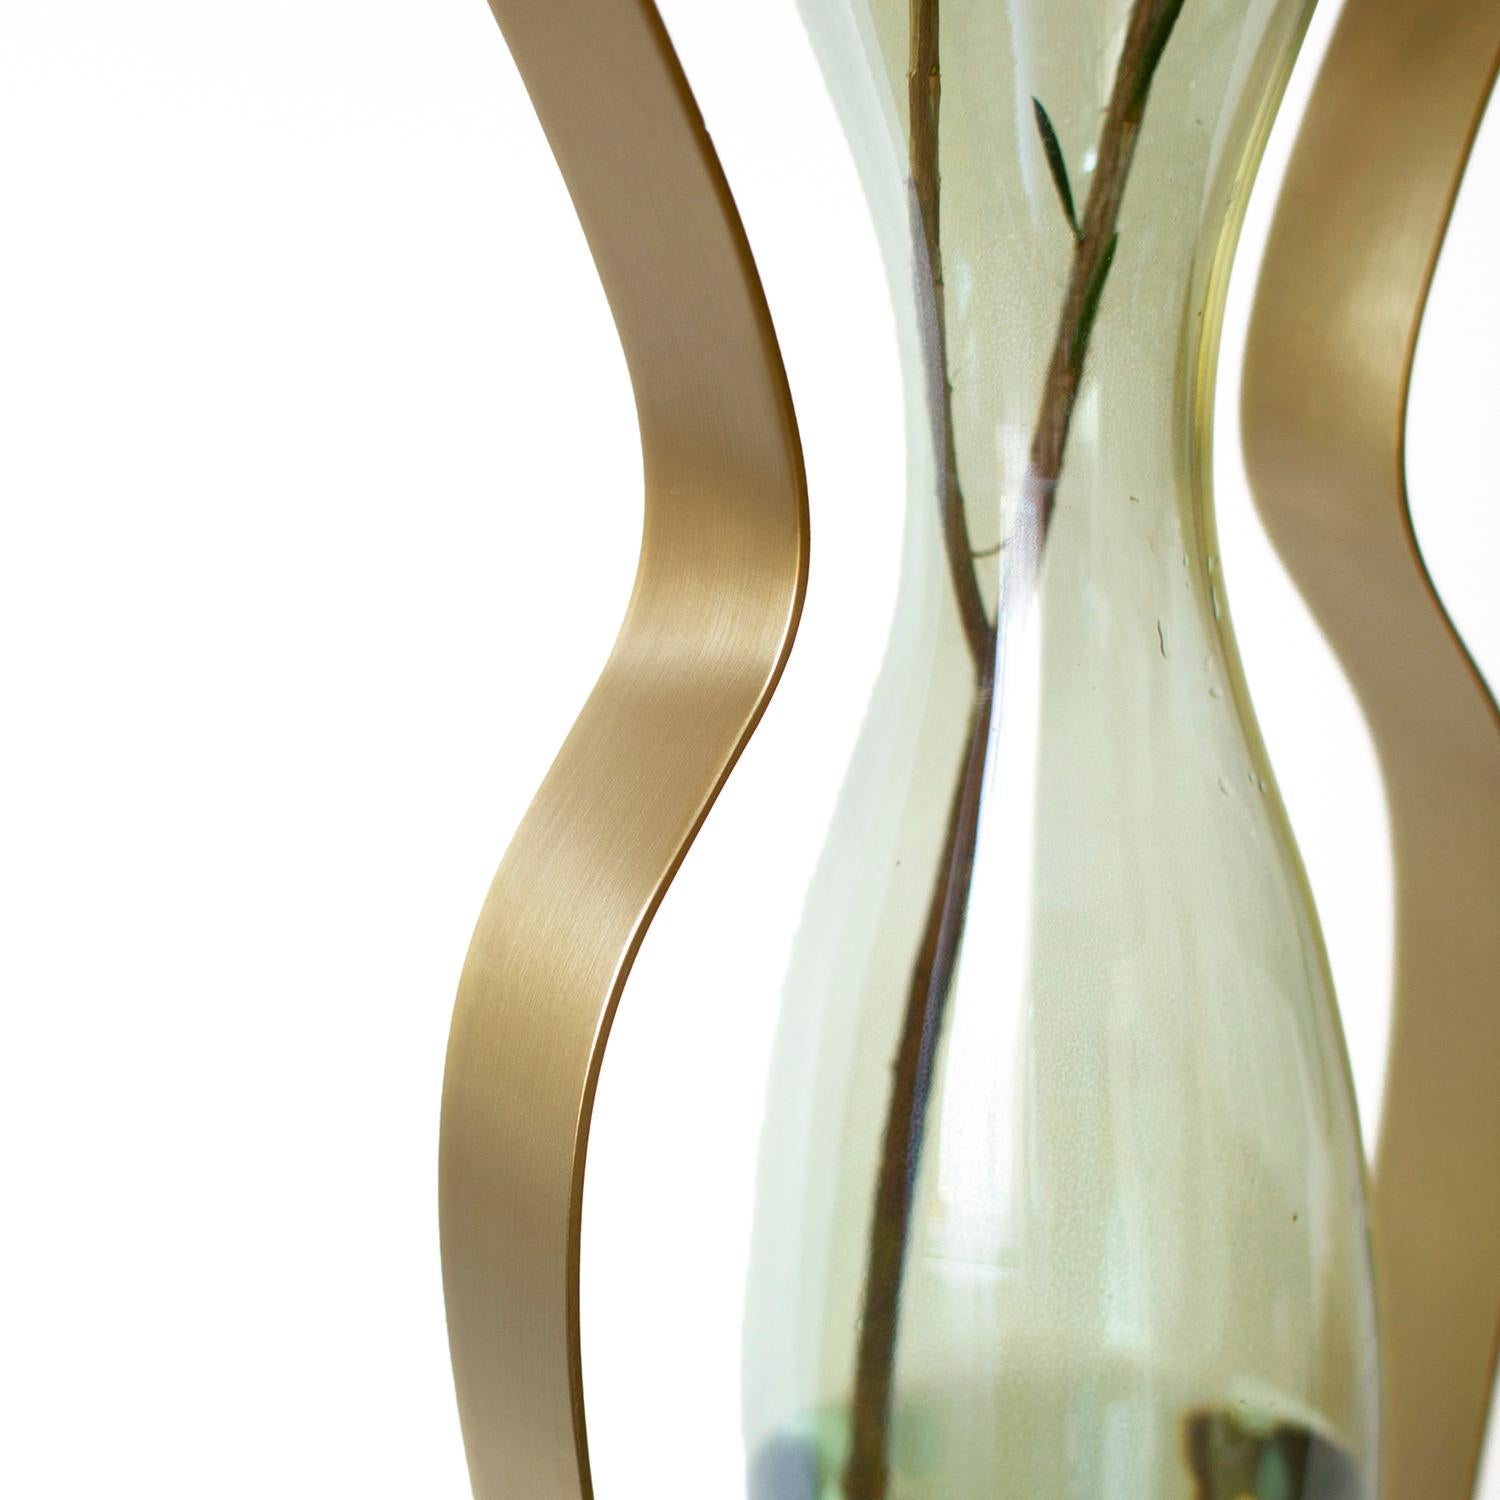 Stainless Steel Droplet Handblown Glass and Metal Vases Set of 2, Green, Blue and Gold For Sale